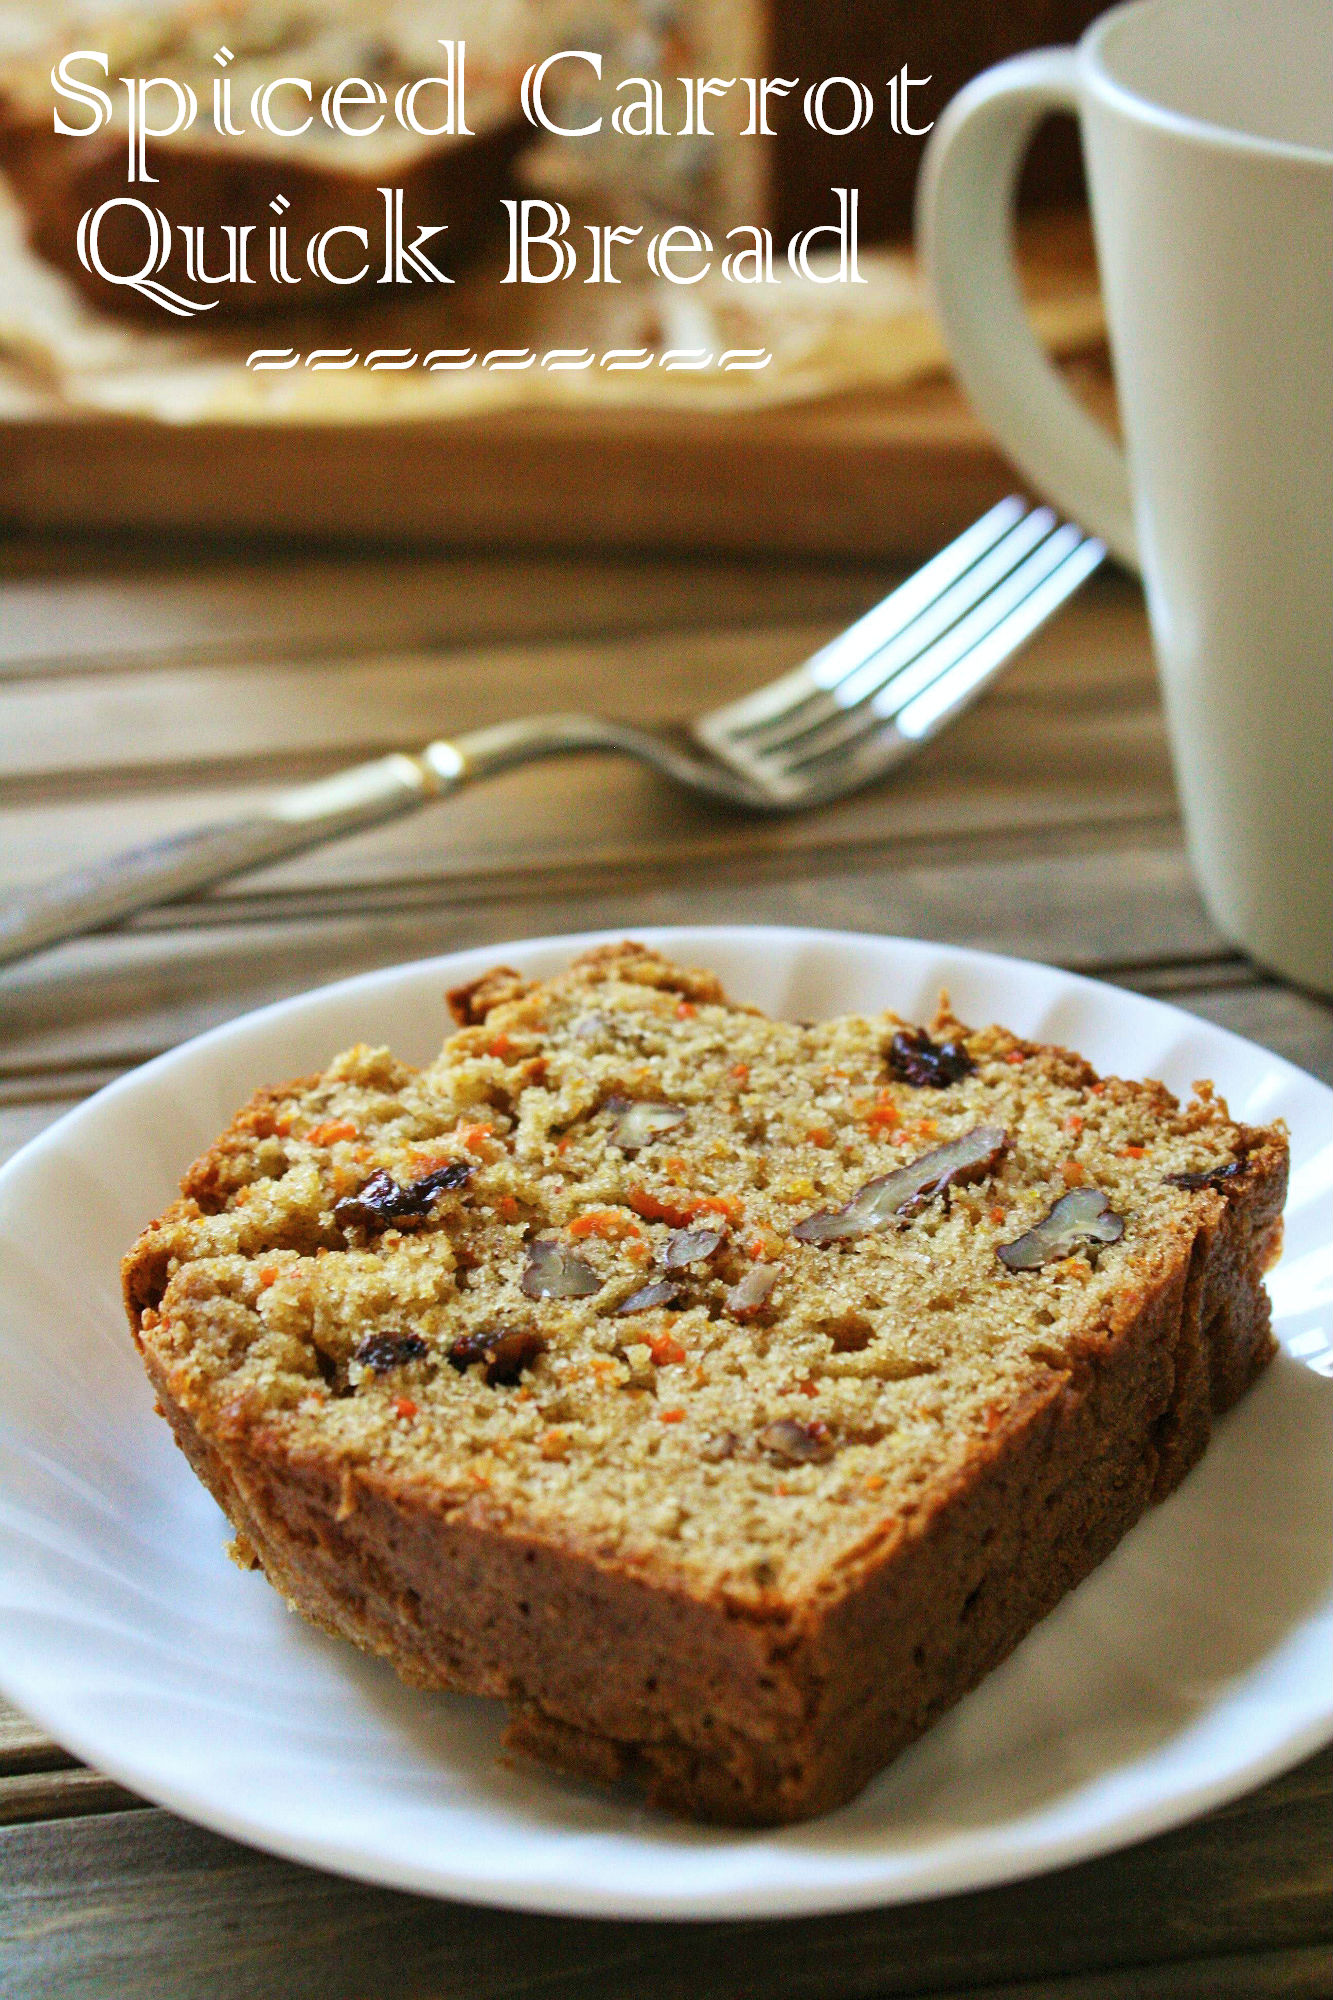 Spiced Carrot Quick Bread - The Tasty Bite